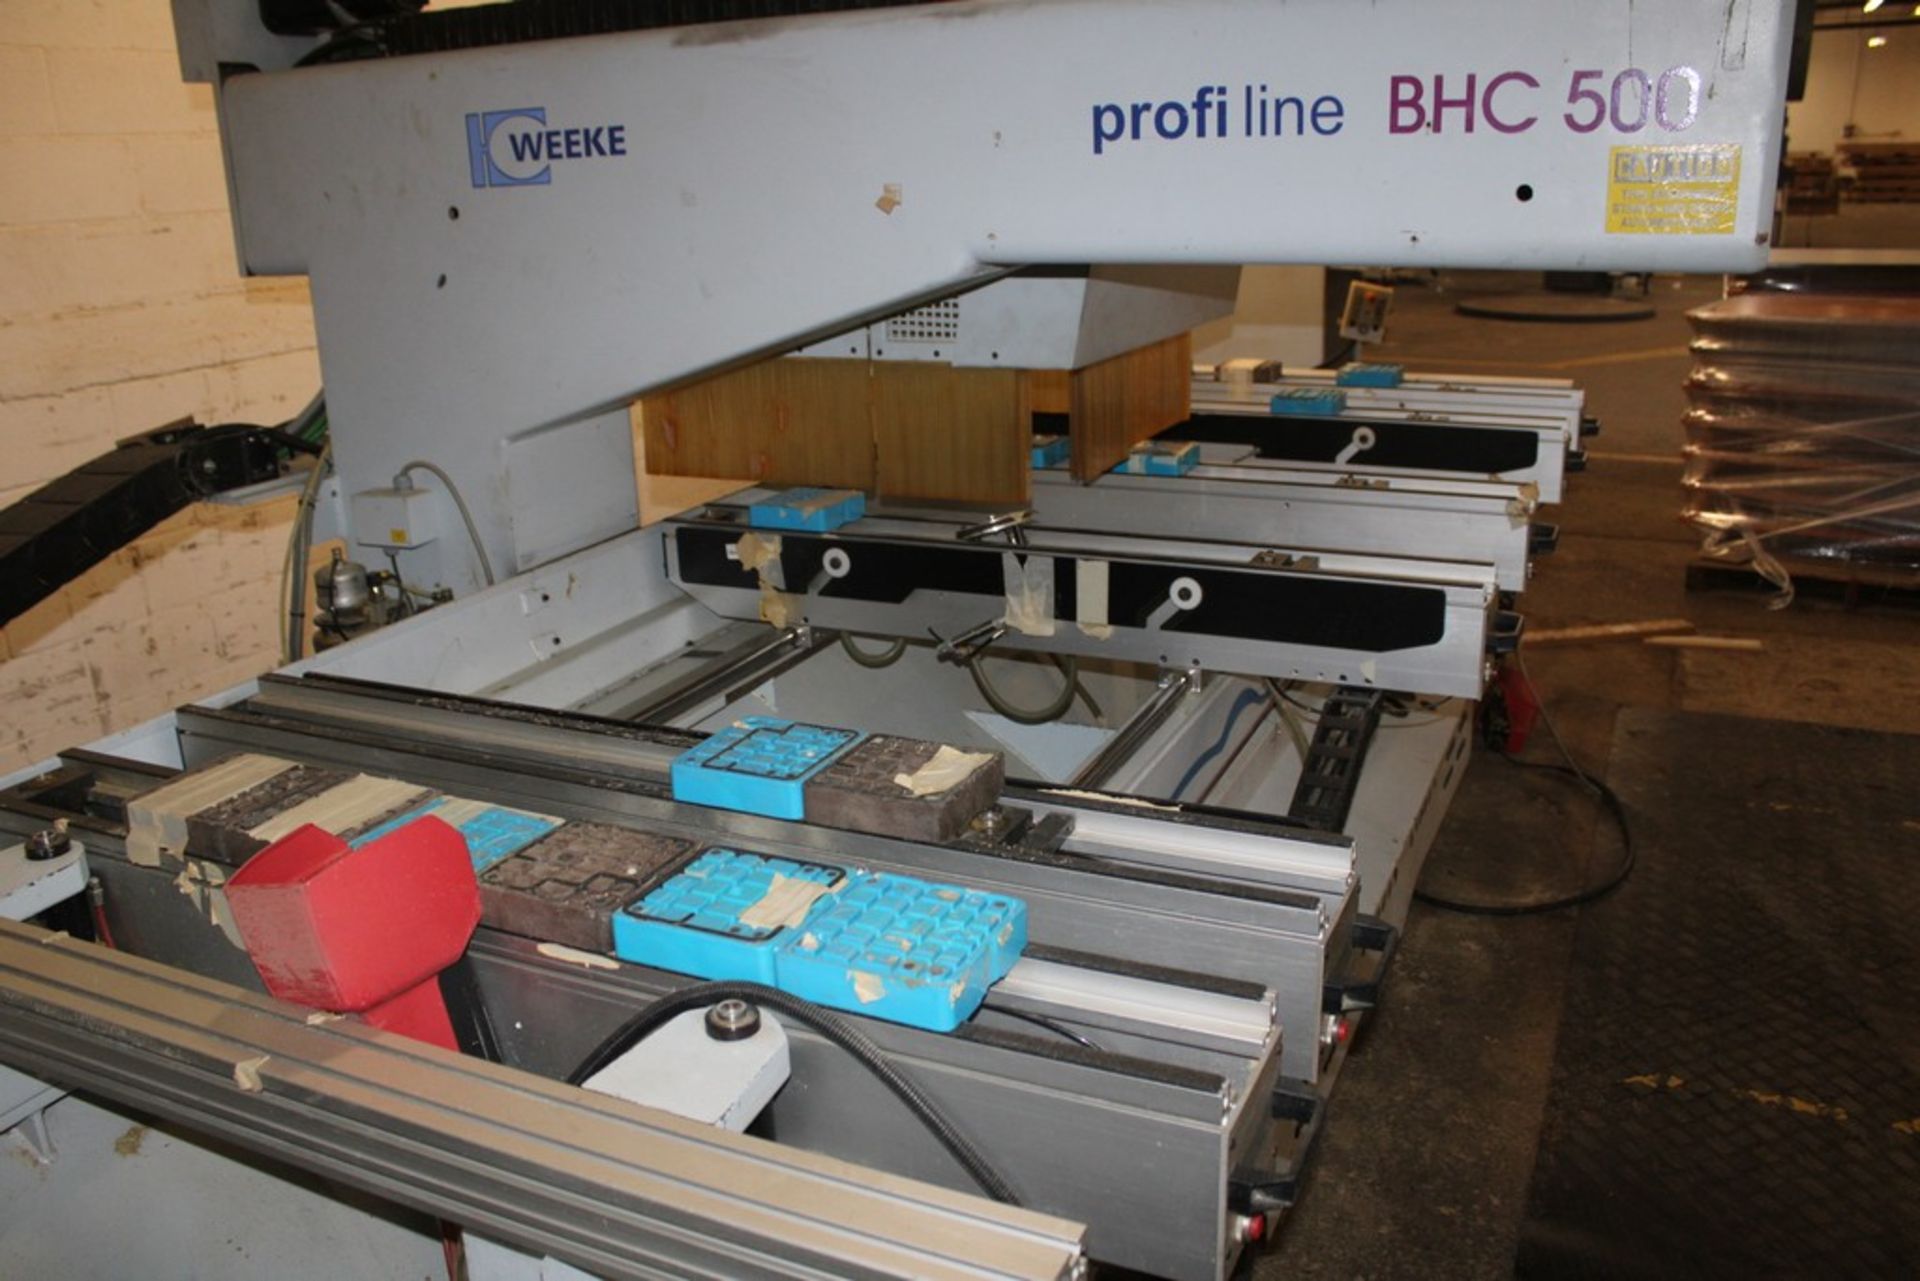 WEEKE MODEL PROFILINE BHC500 CNC ROUTER, S/N 0-250-13-0834 (NEW 2001), 120” MAX. PANEL LENGTH, 48” - Image 5 of 12